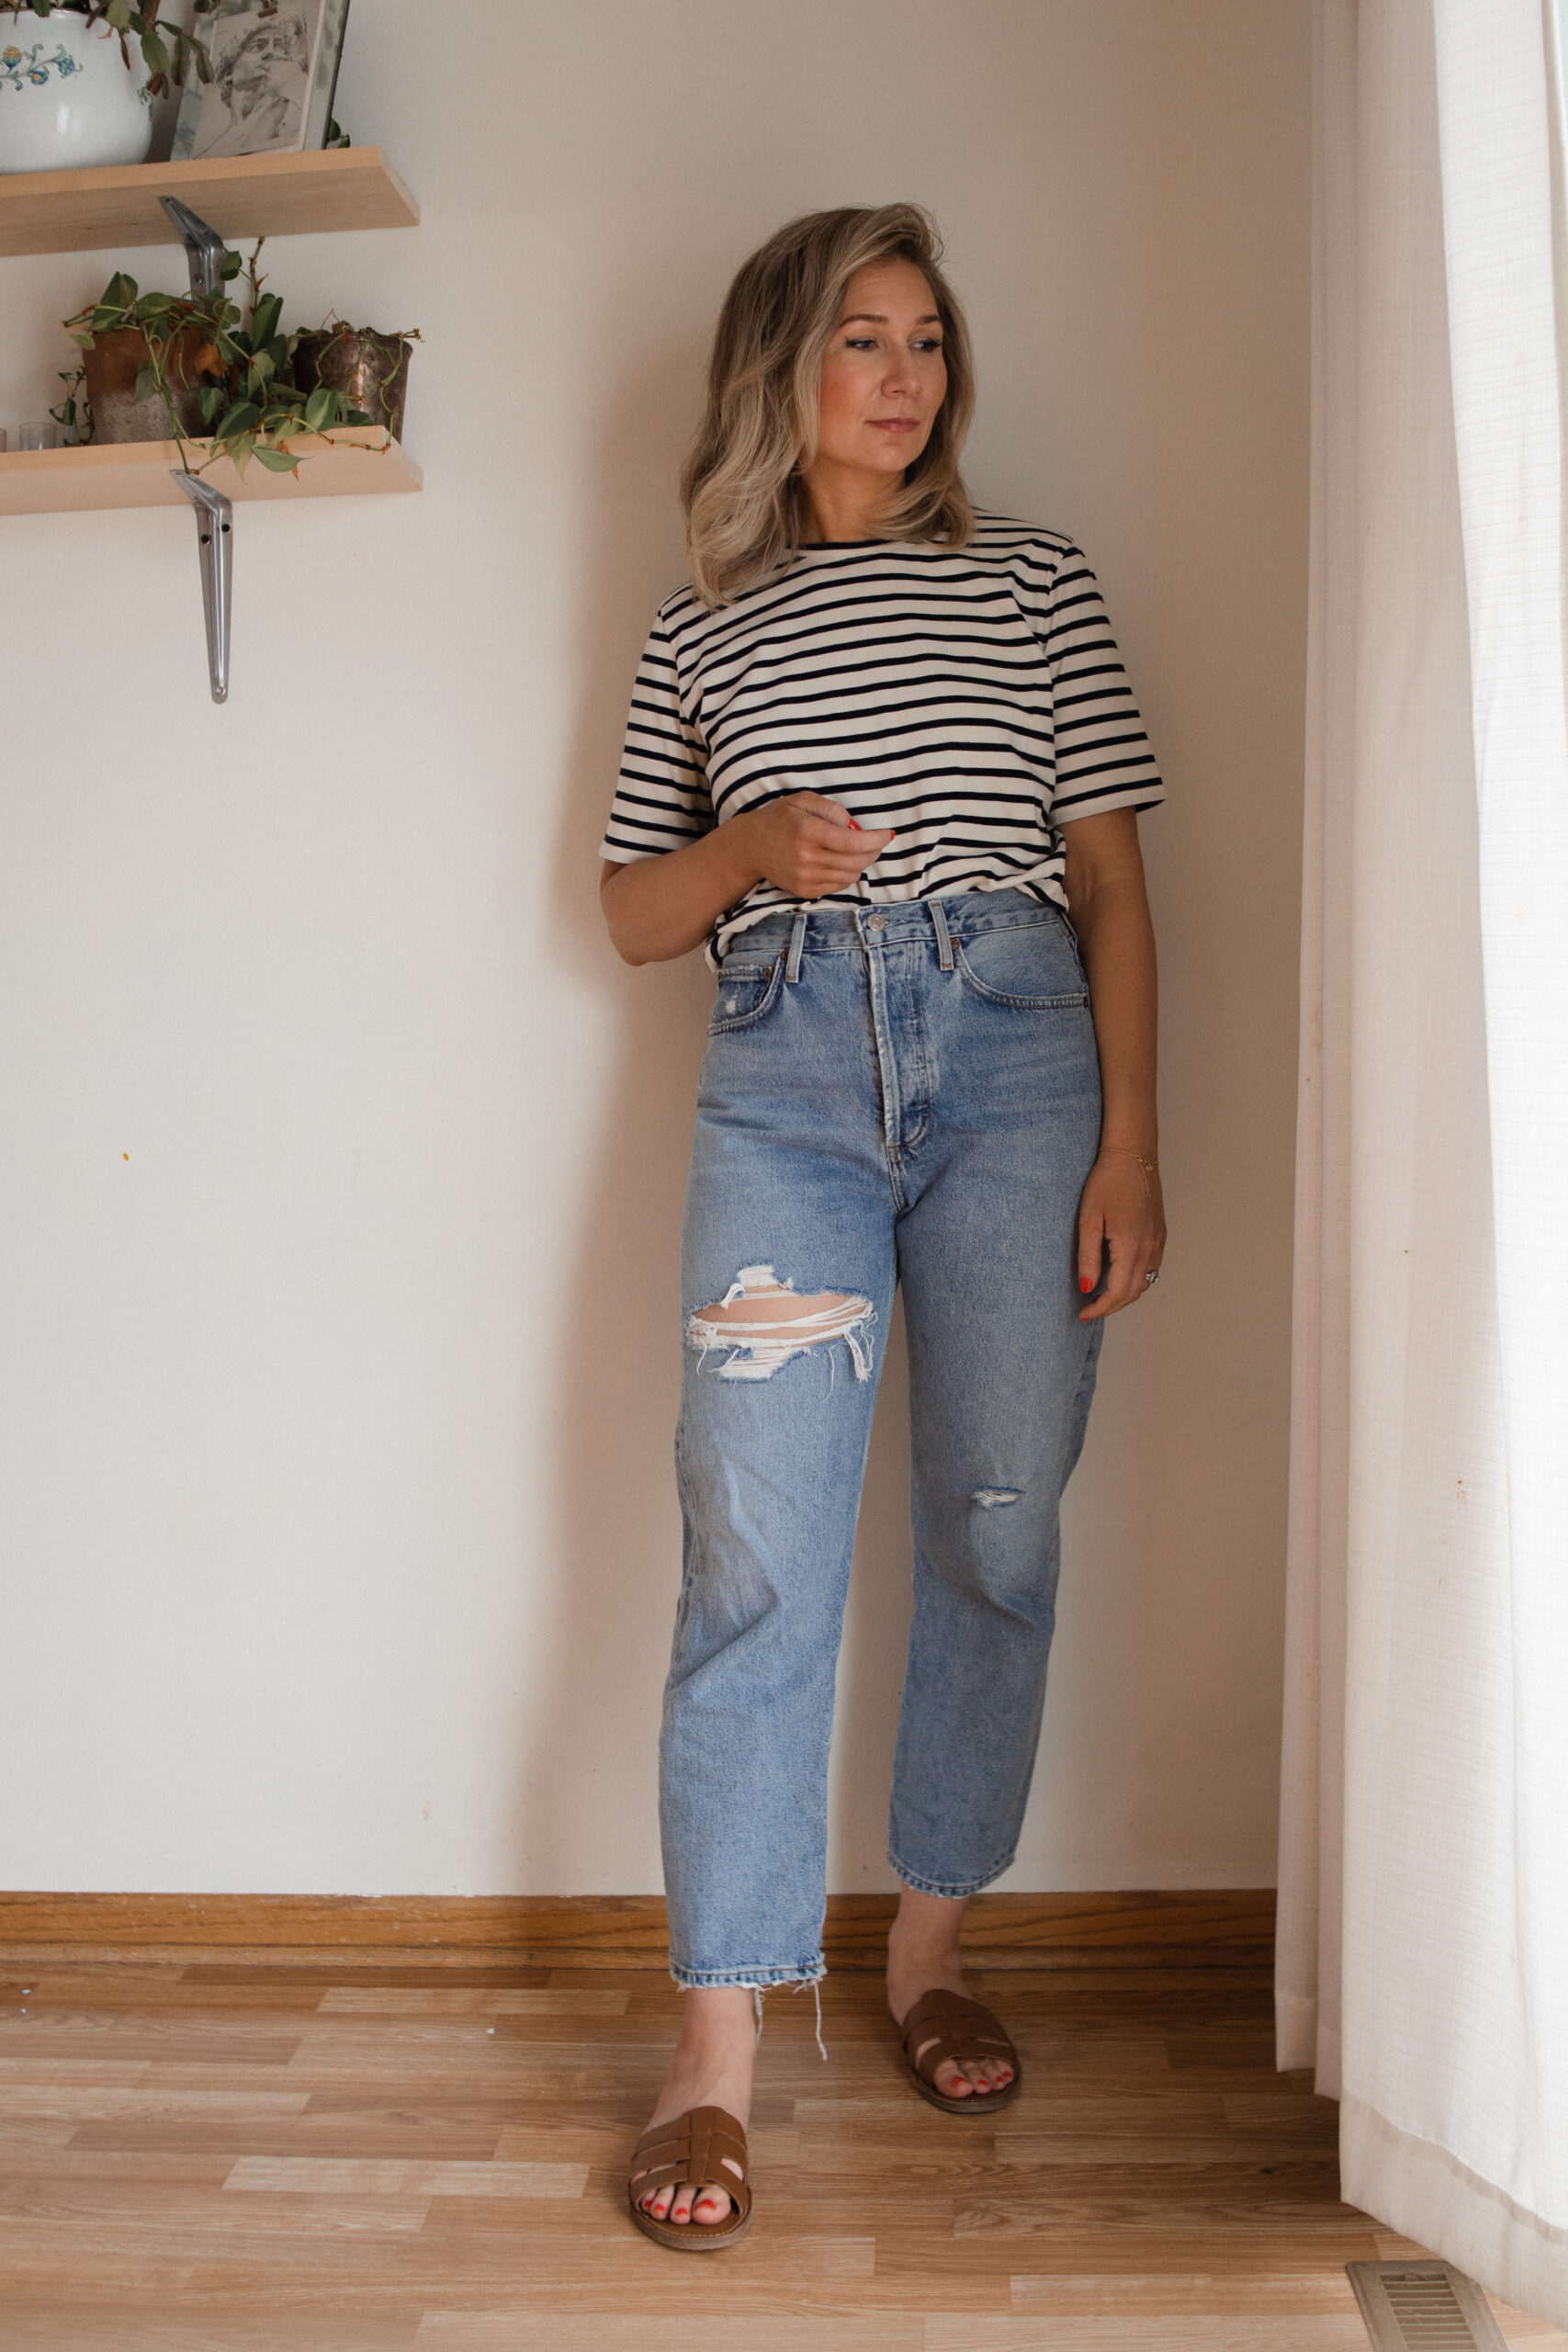 Karin Emily wears a pair of AGOLDE 90's straight jeans with a striped tee and brown sandals for her AGOLDE denim guide